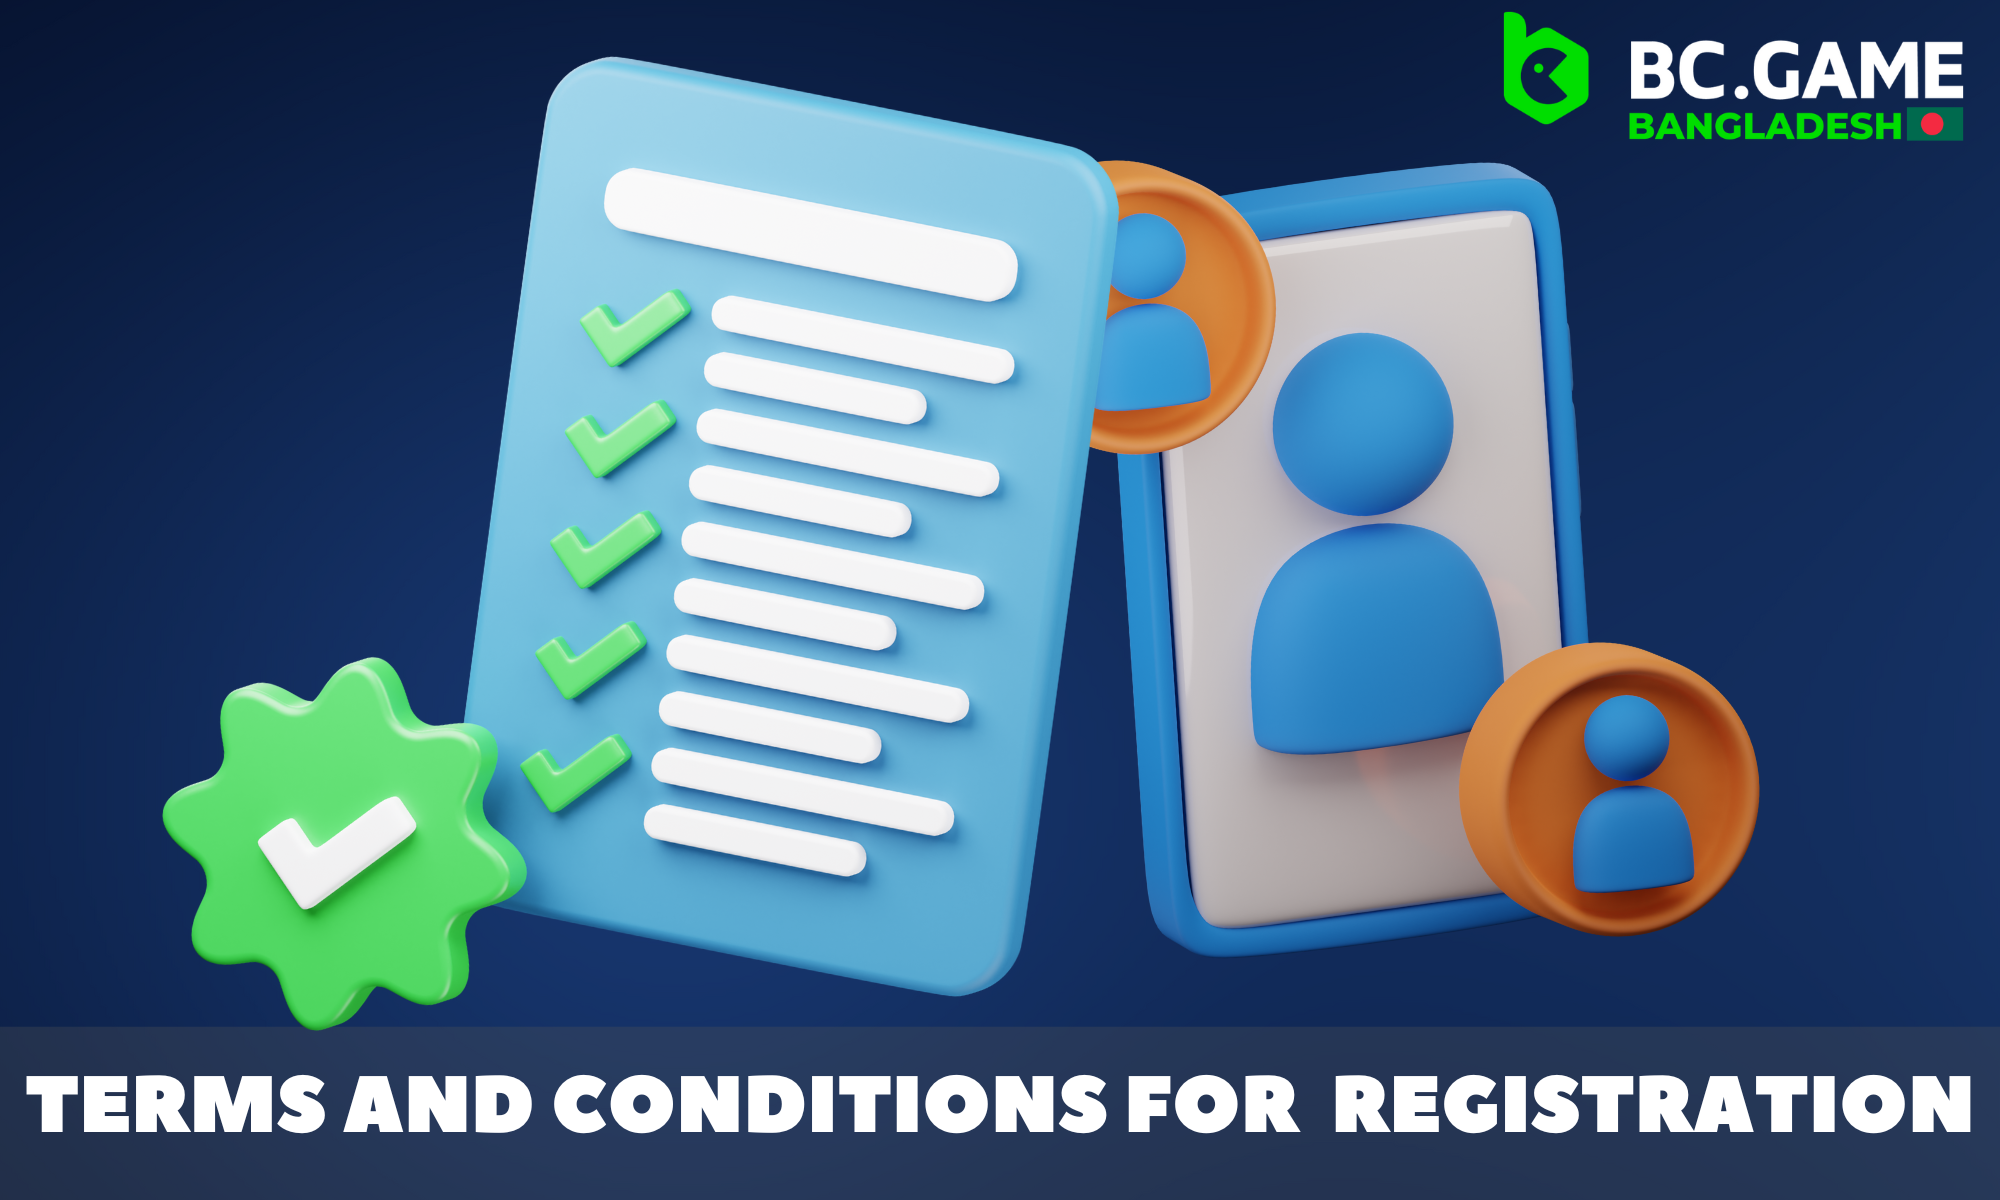 Overview of the conditions that must be met when registering an account with BC Game